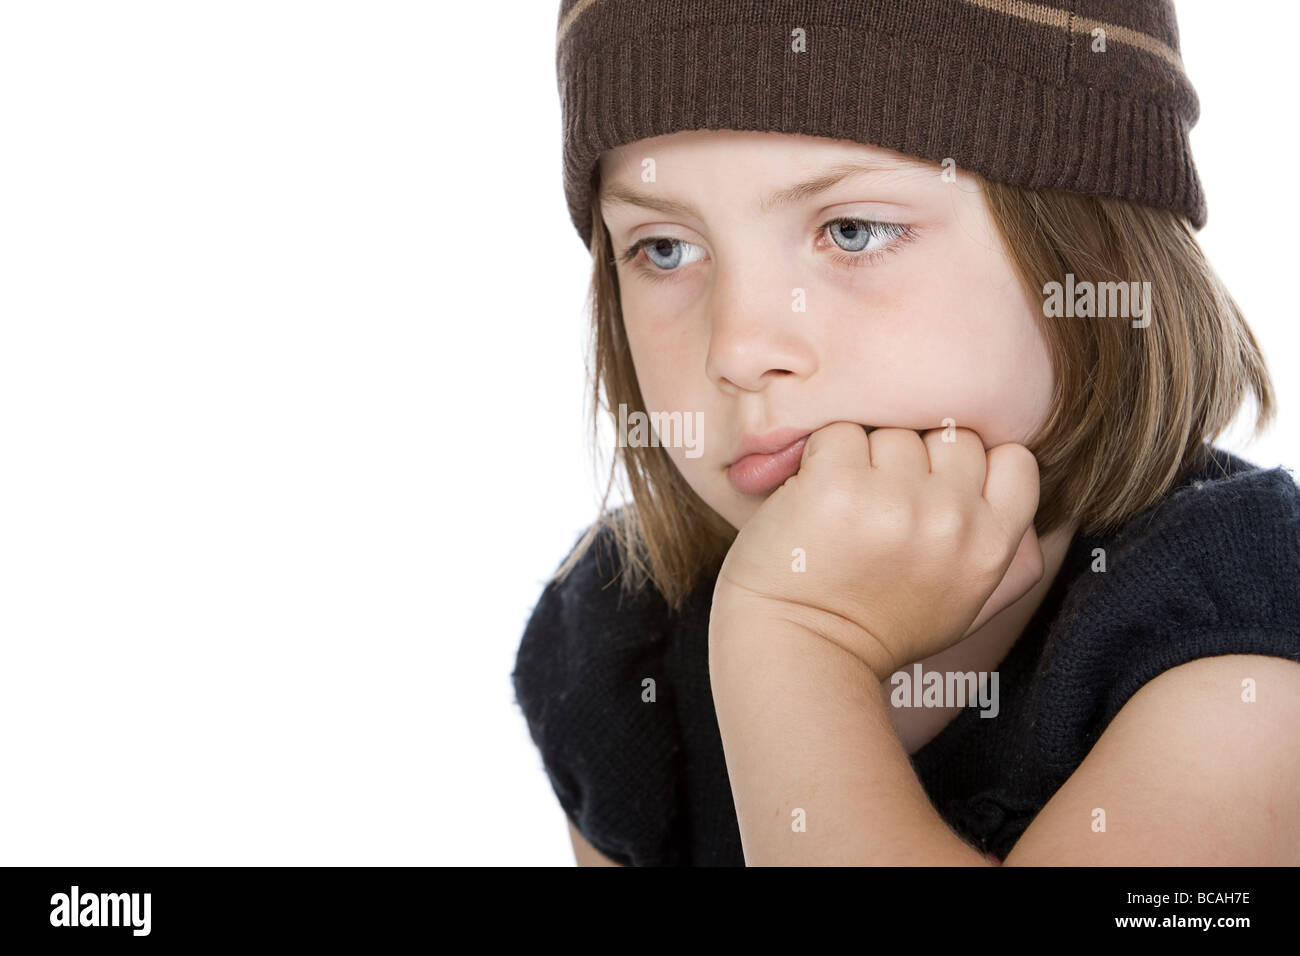 Shot of a Sweet Child Looking Sad Stock Photo